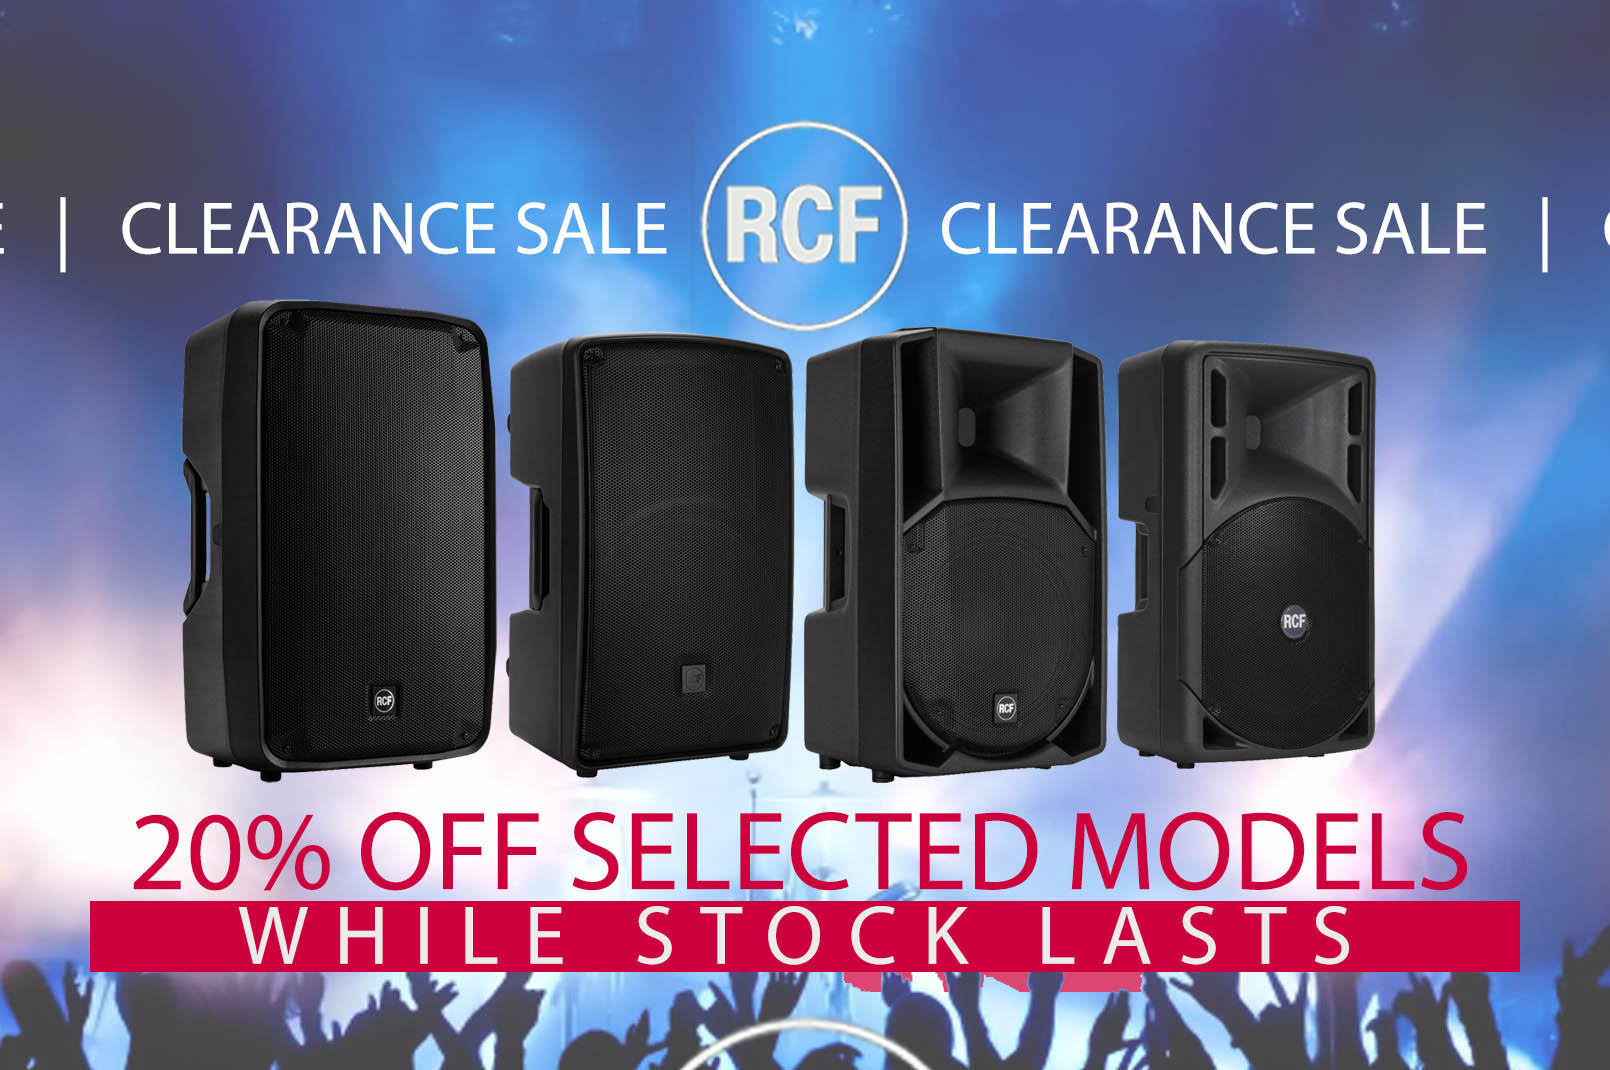 RCF CLEARANCE SALE | 20% OFF SELECTED MODELS